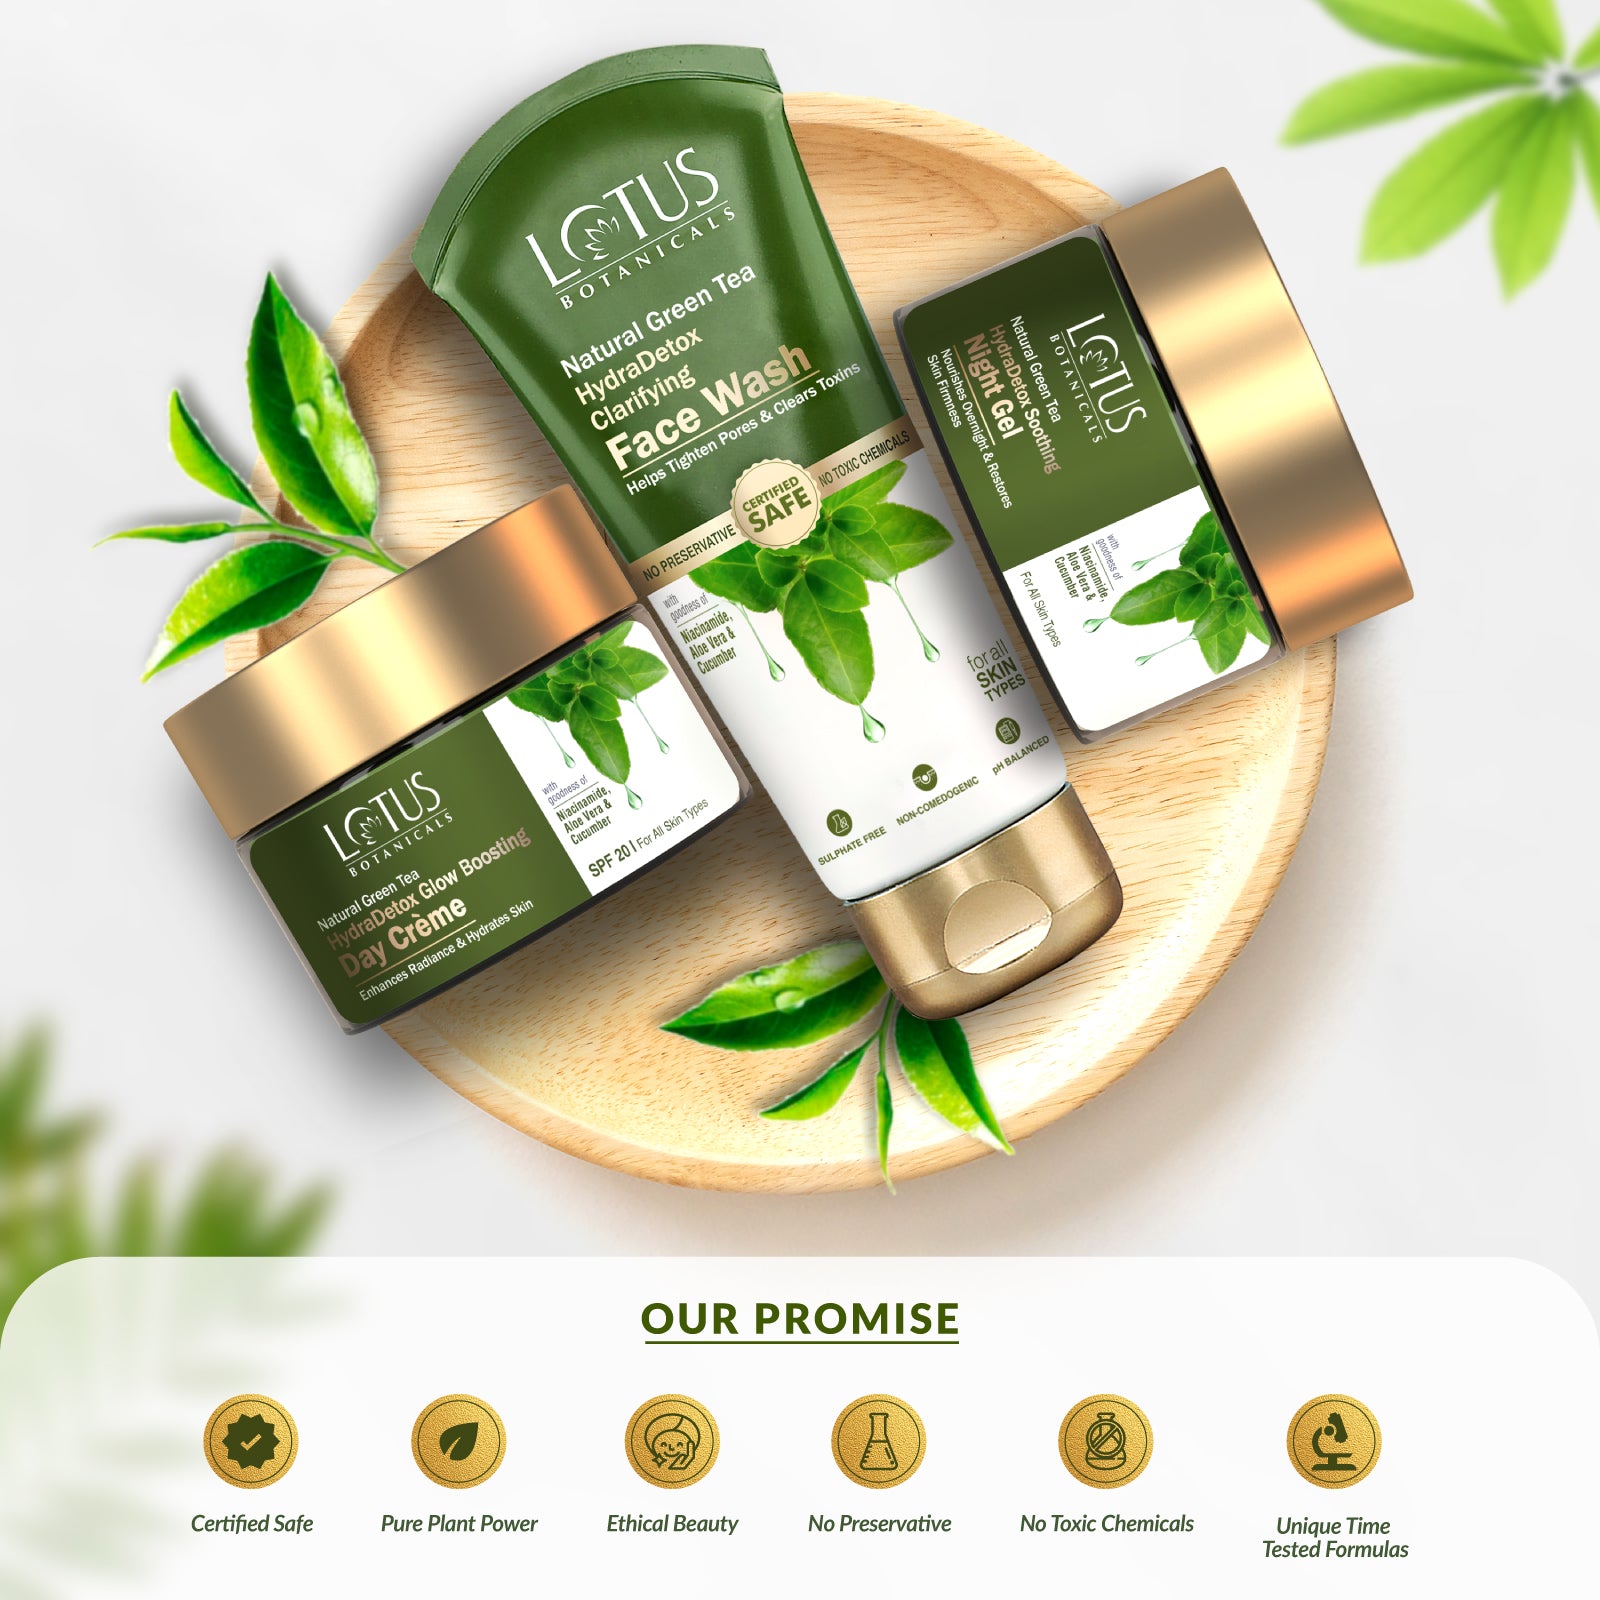 Green Tea Refreshing Radiance Combo - A revitalizing blend of green tea for a refreshing and radiant experience